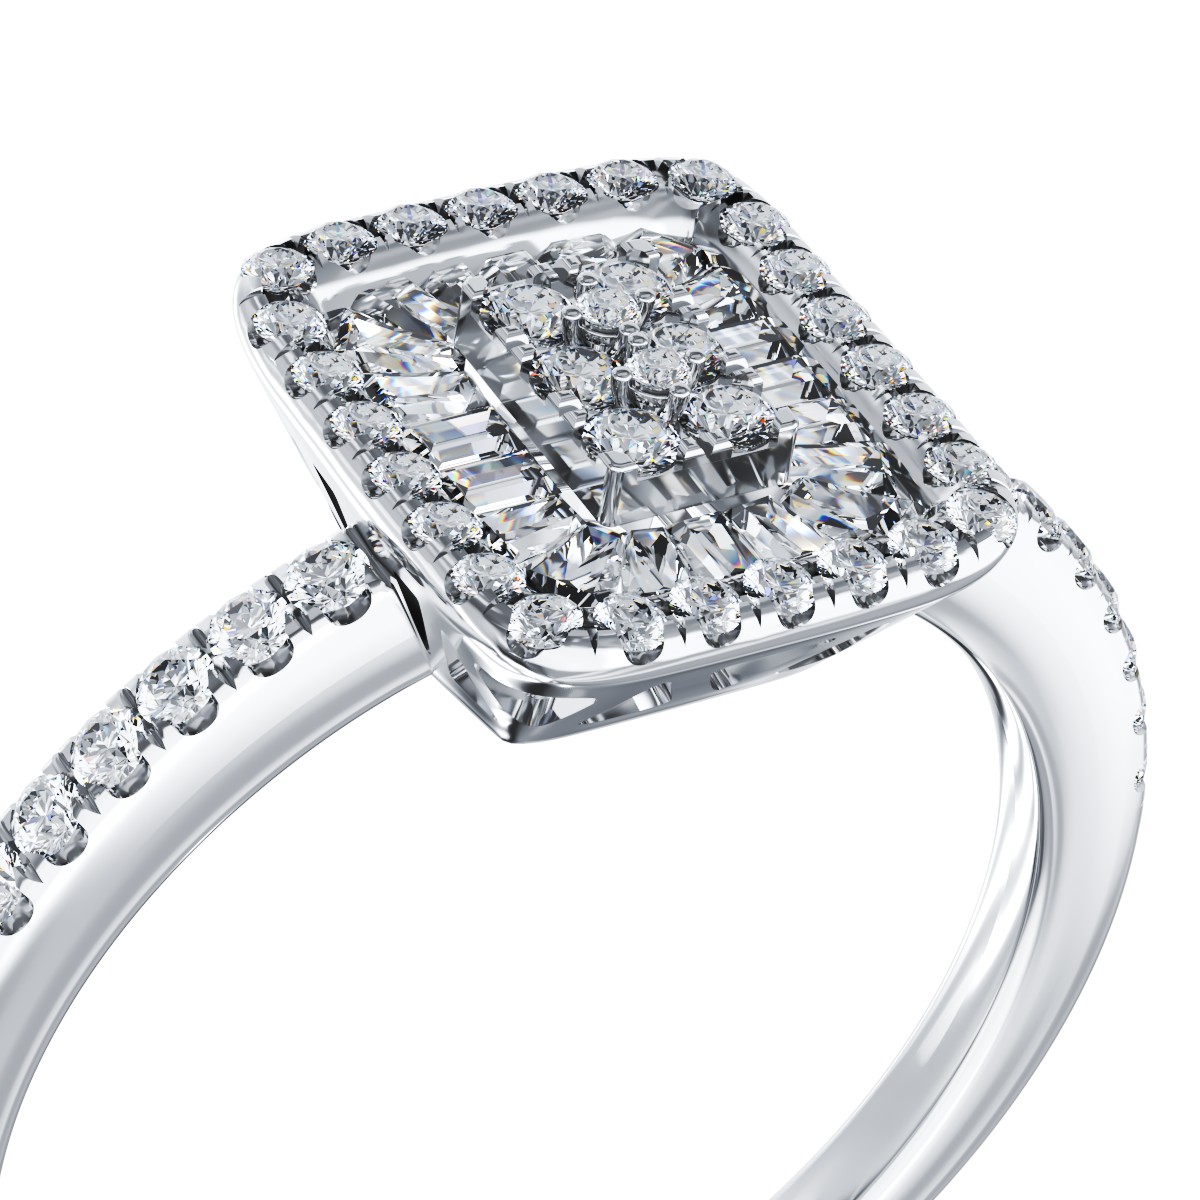 18K white gold engagement ring with 0.26ct diamonds